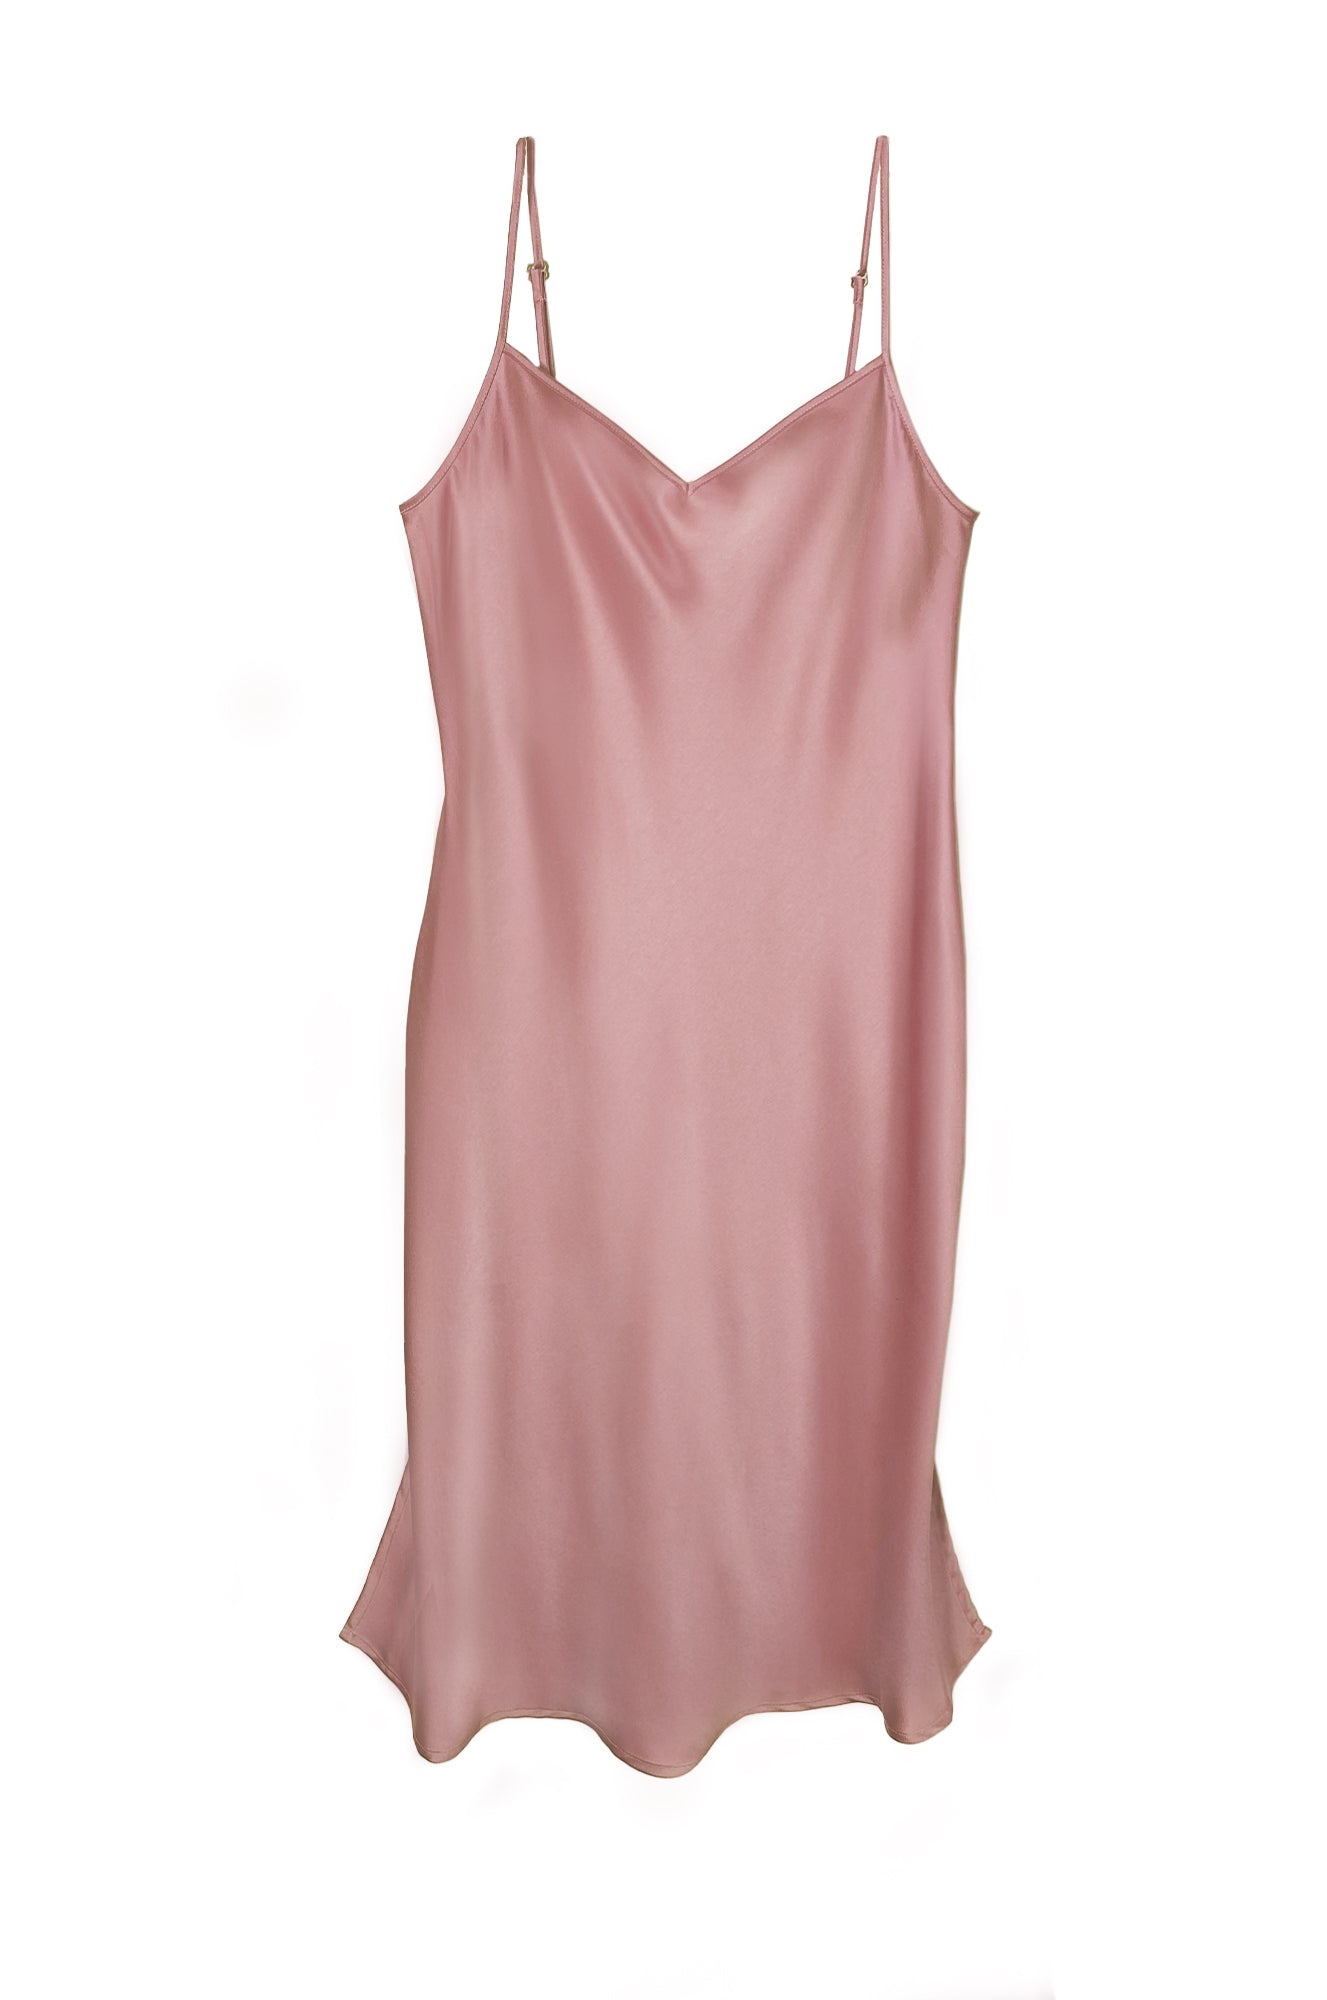 Vintage Disco Slip Dress in Blush by Cynthia Vincent BAACAL – Baacal